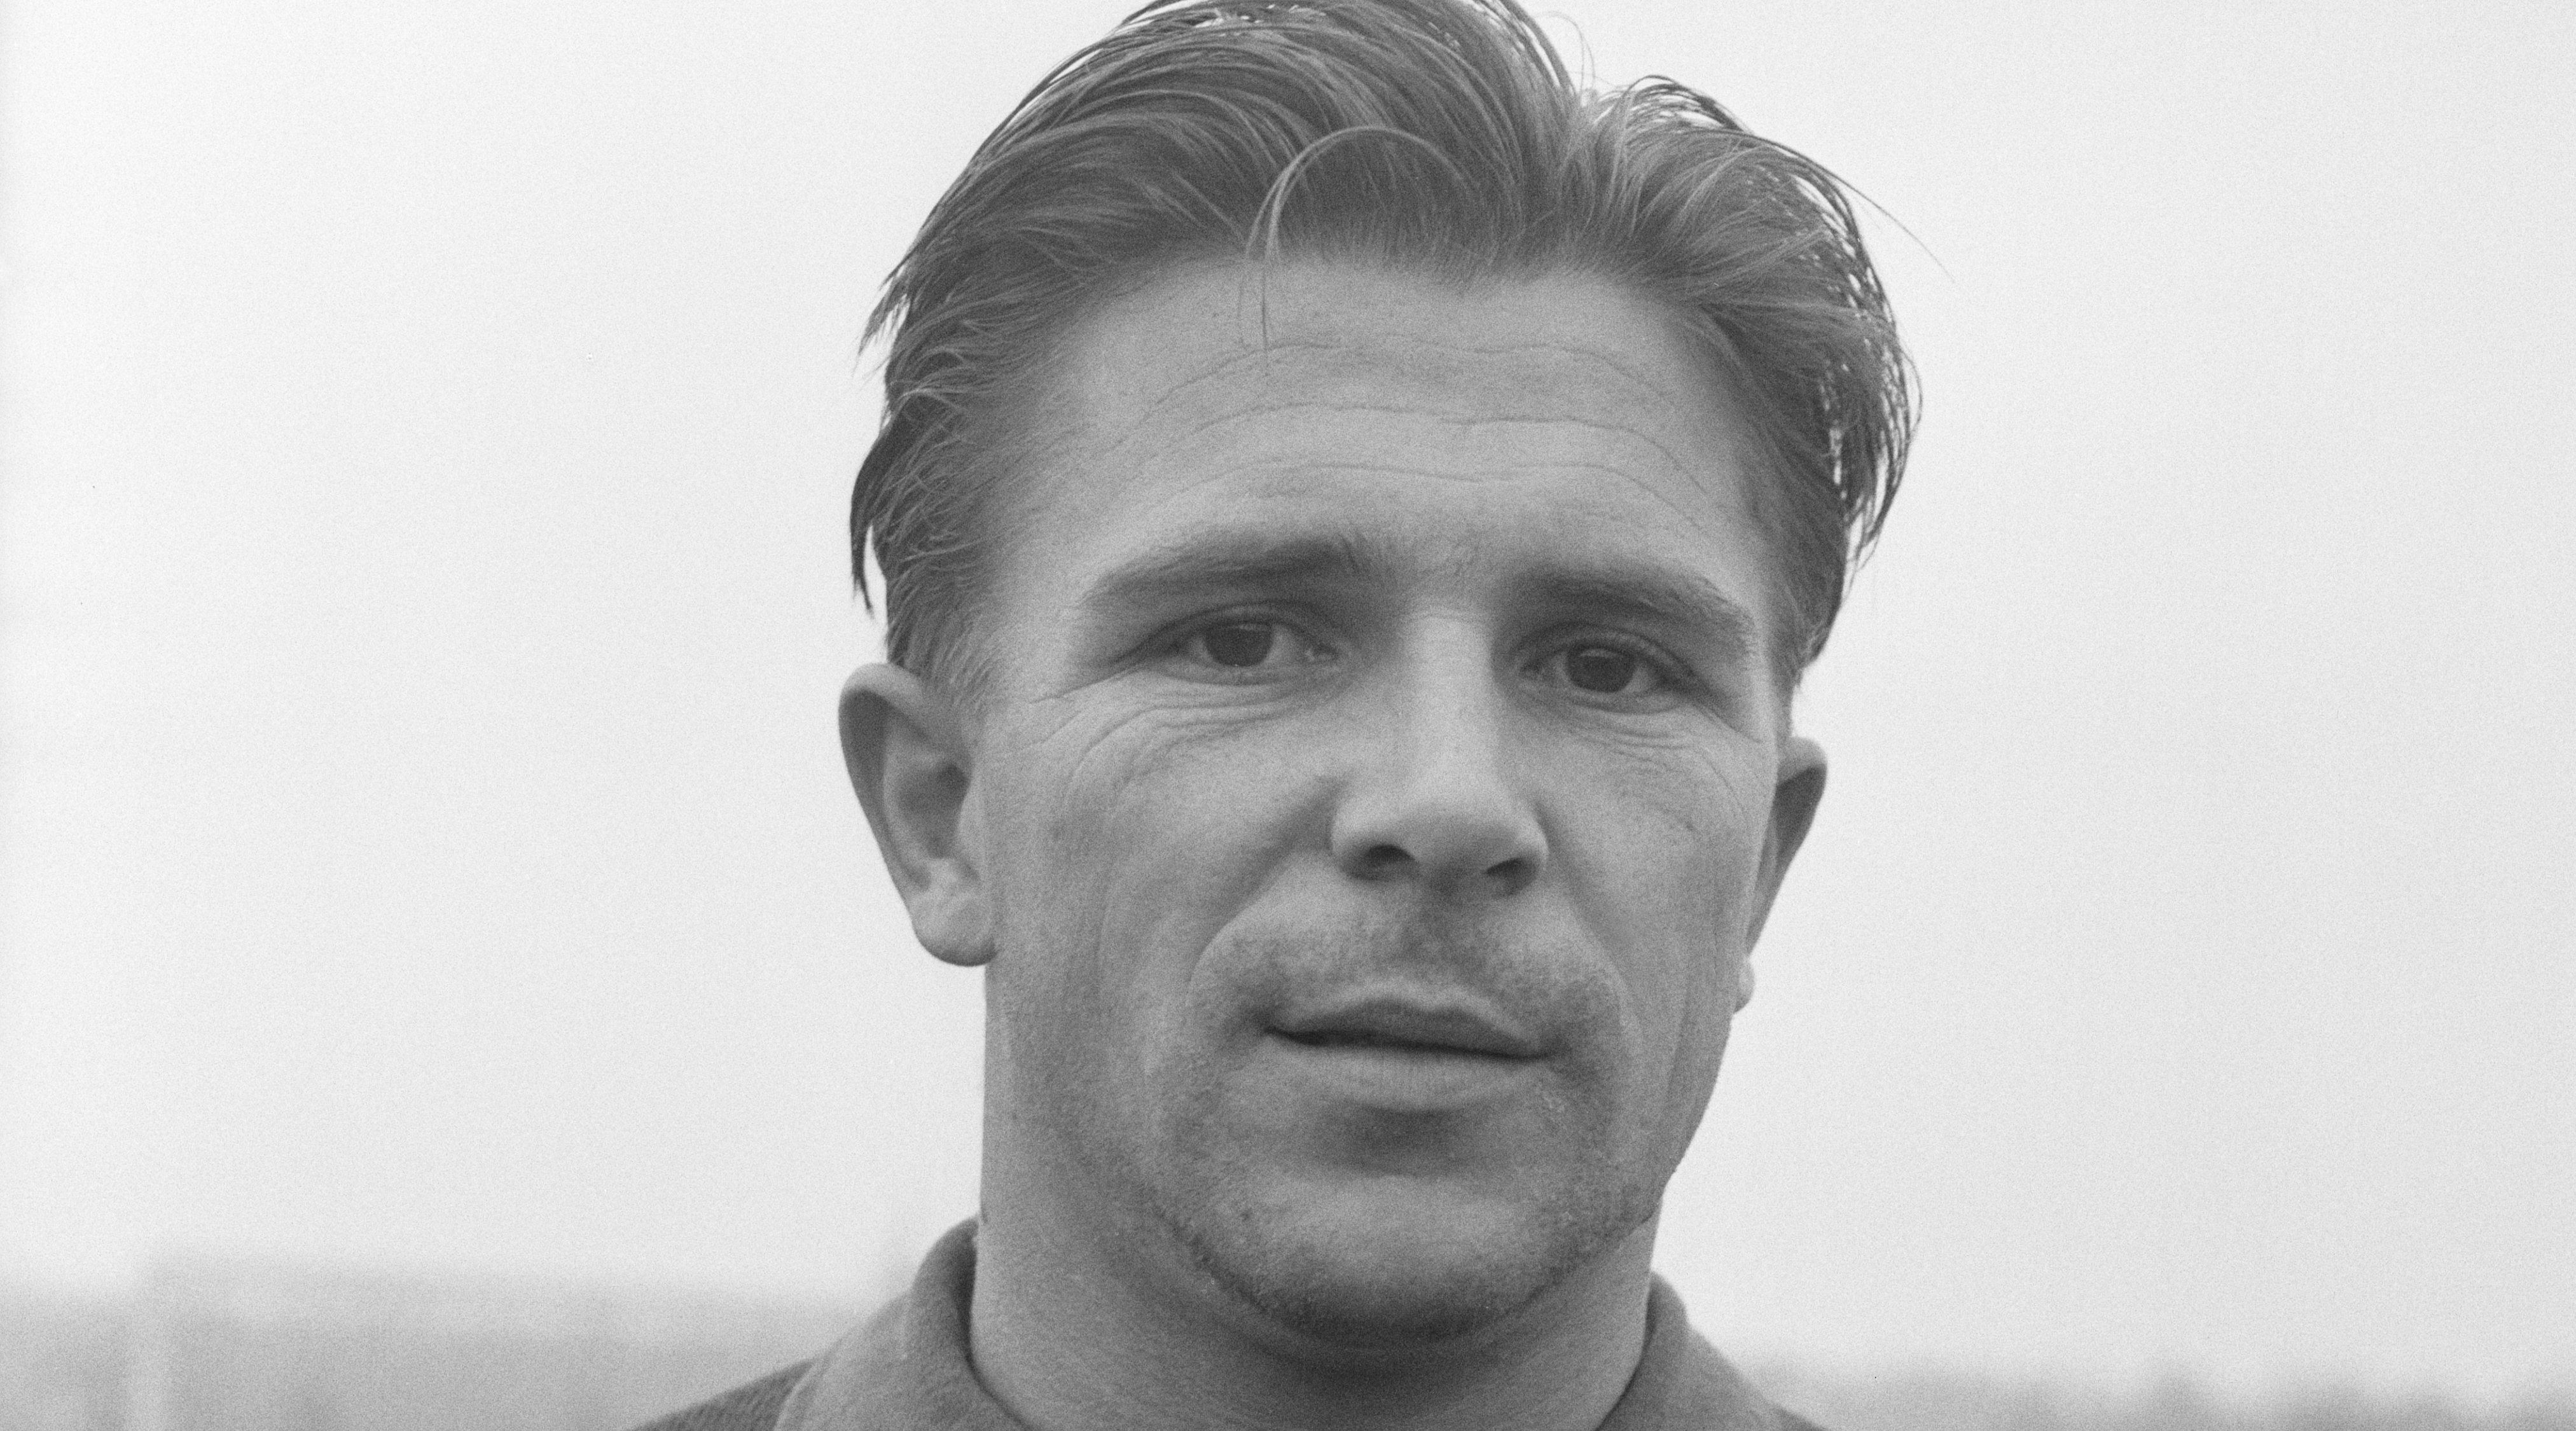 Famous Hungarian player Ferenc Puskas. (Photo by Universal/Corbis/VCG via Getty Images)